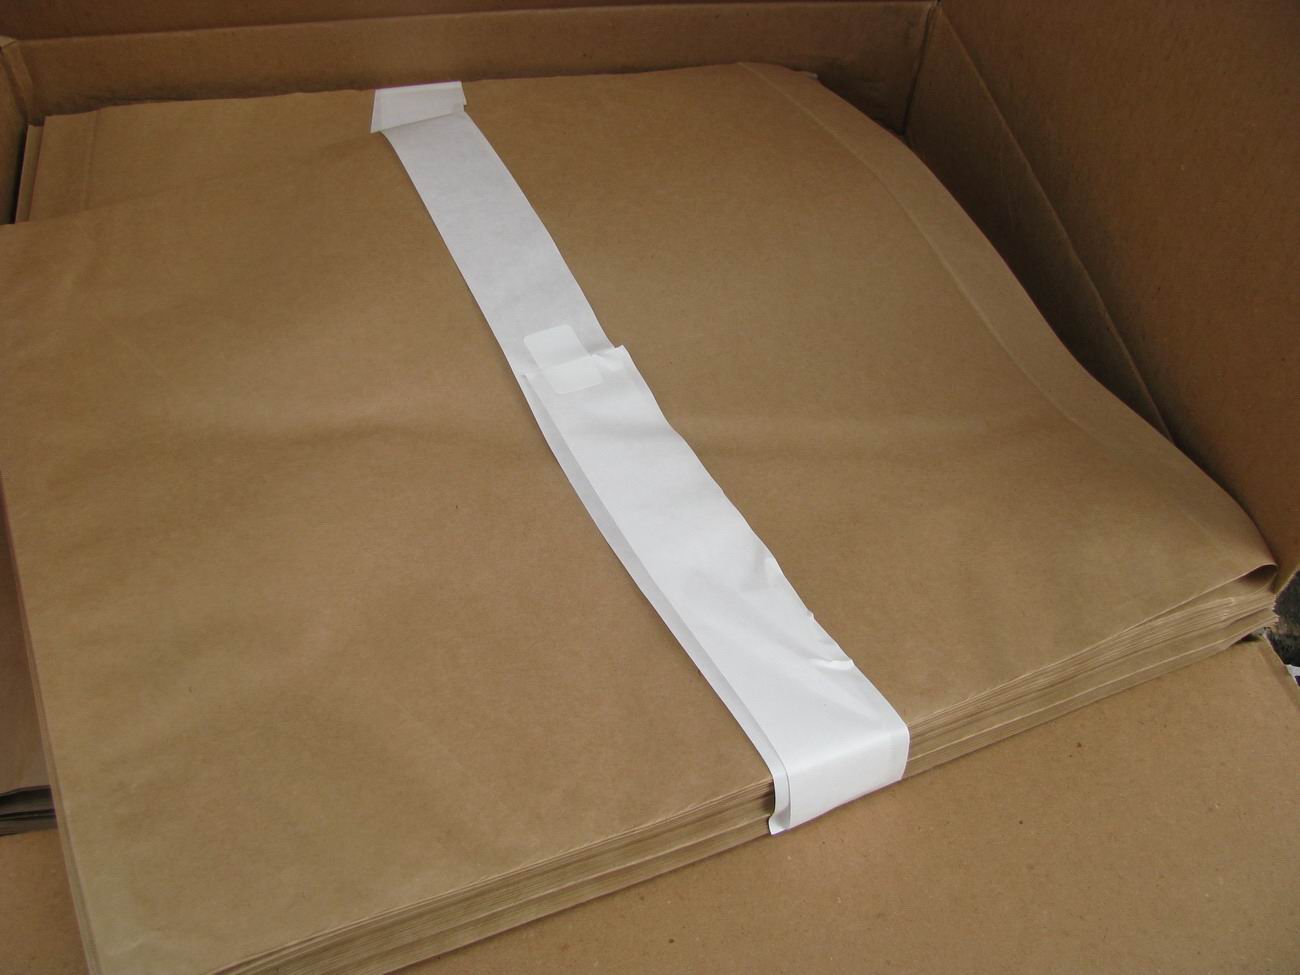 Kraft Paper Self-Sealing Pouch: Secure Packaging Solution for Hospital Sterilization